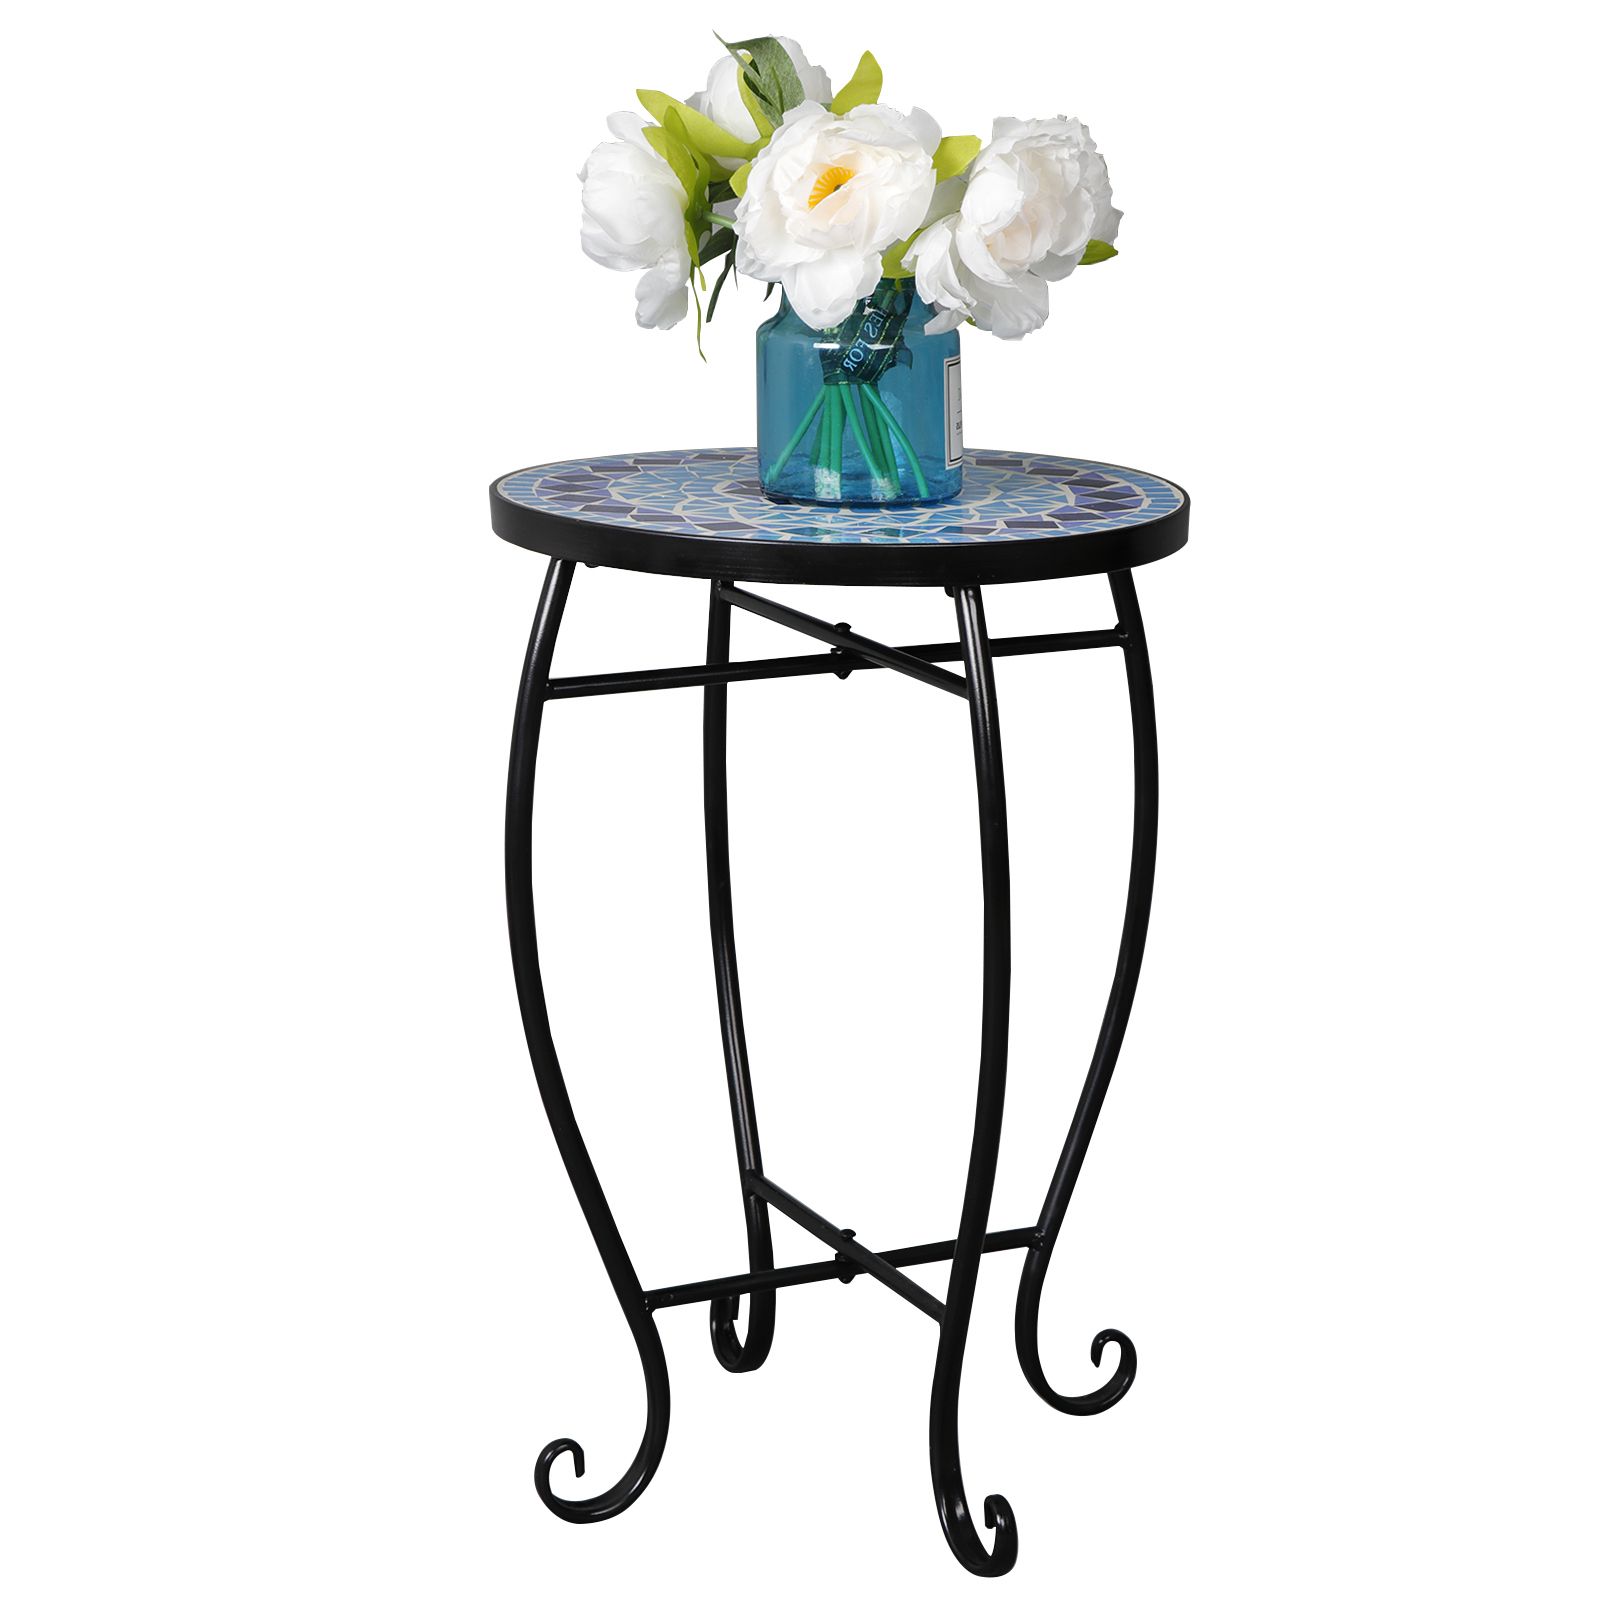 Mosaic Outdoor Accent Tables In Preferred Zeny Mosaic Round Side Accent Table Patio Plant Stand Porch Beach Theme (View 7 of 15)